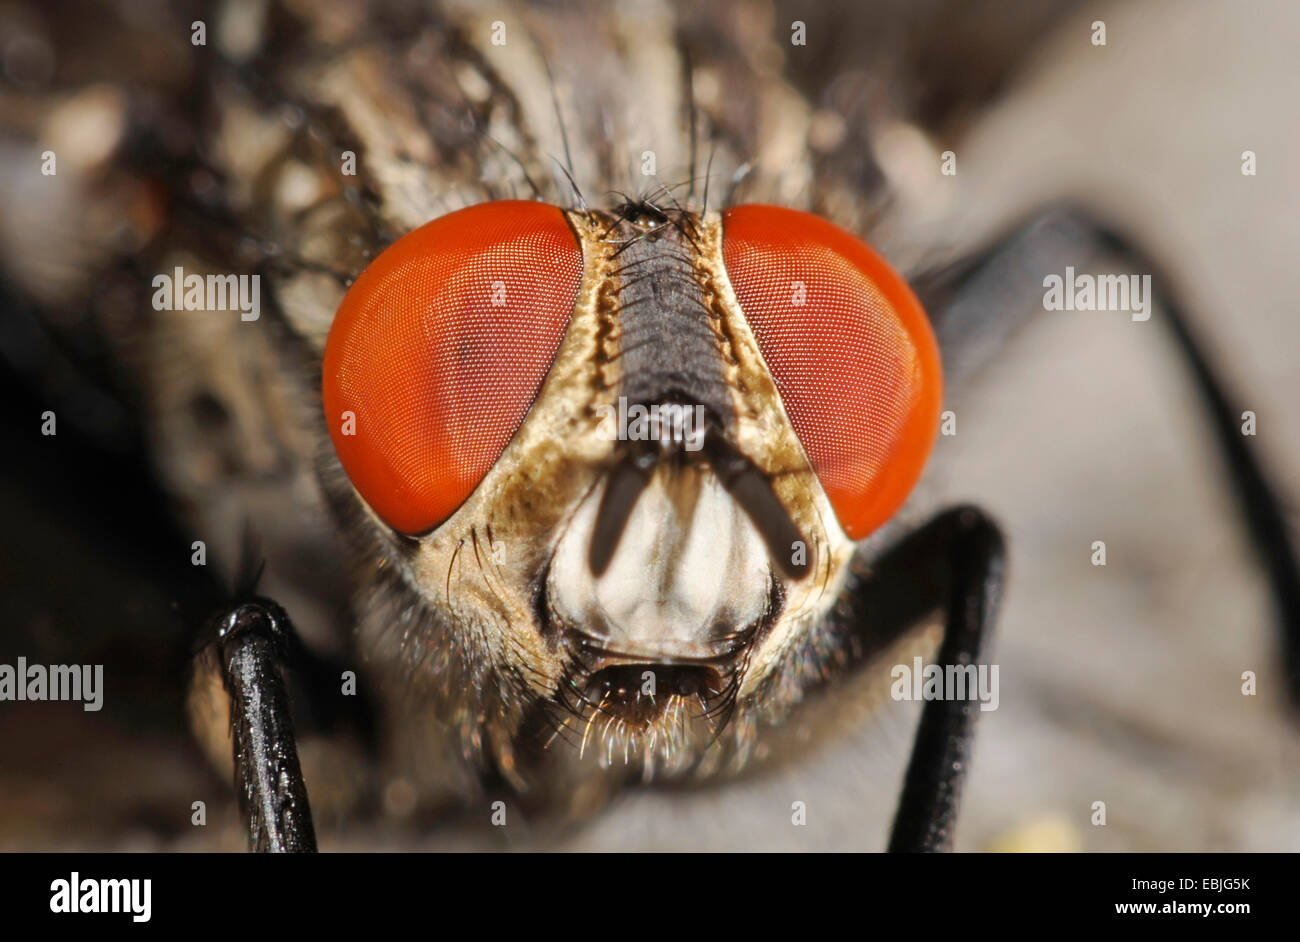 house fly (Musca spec.), Fly with big eyes, Germany Stock Photo